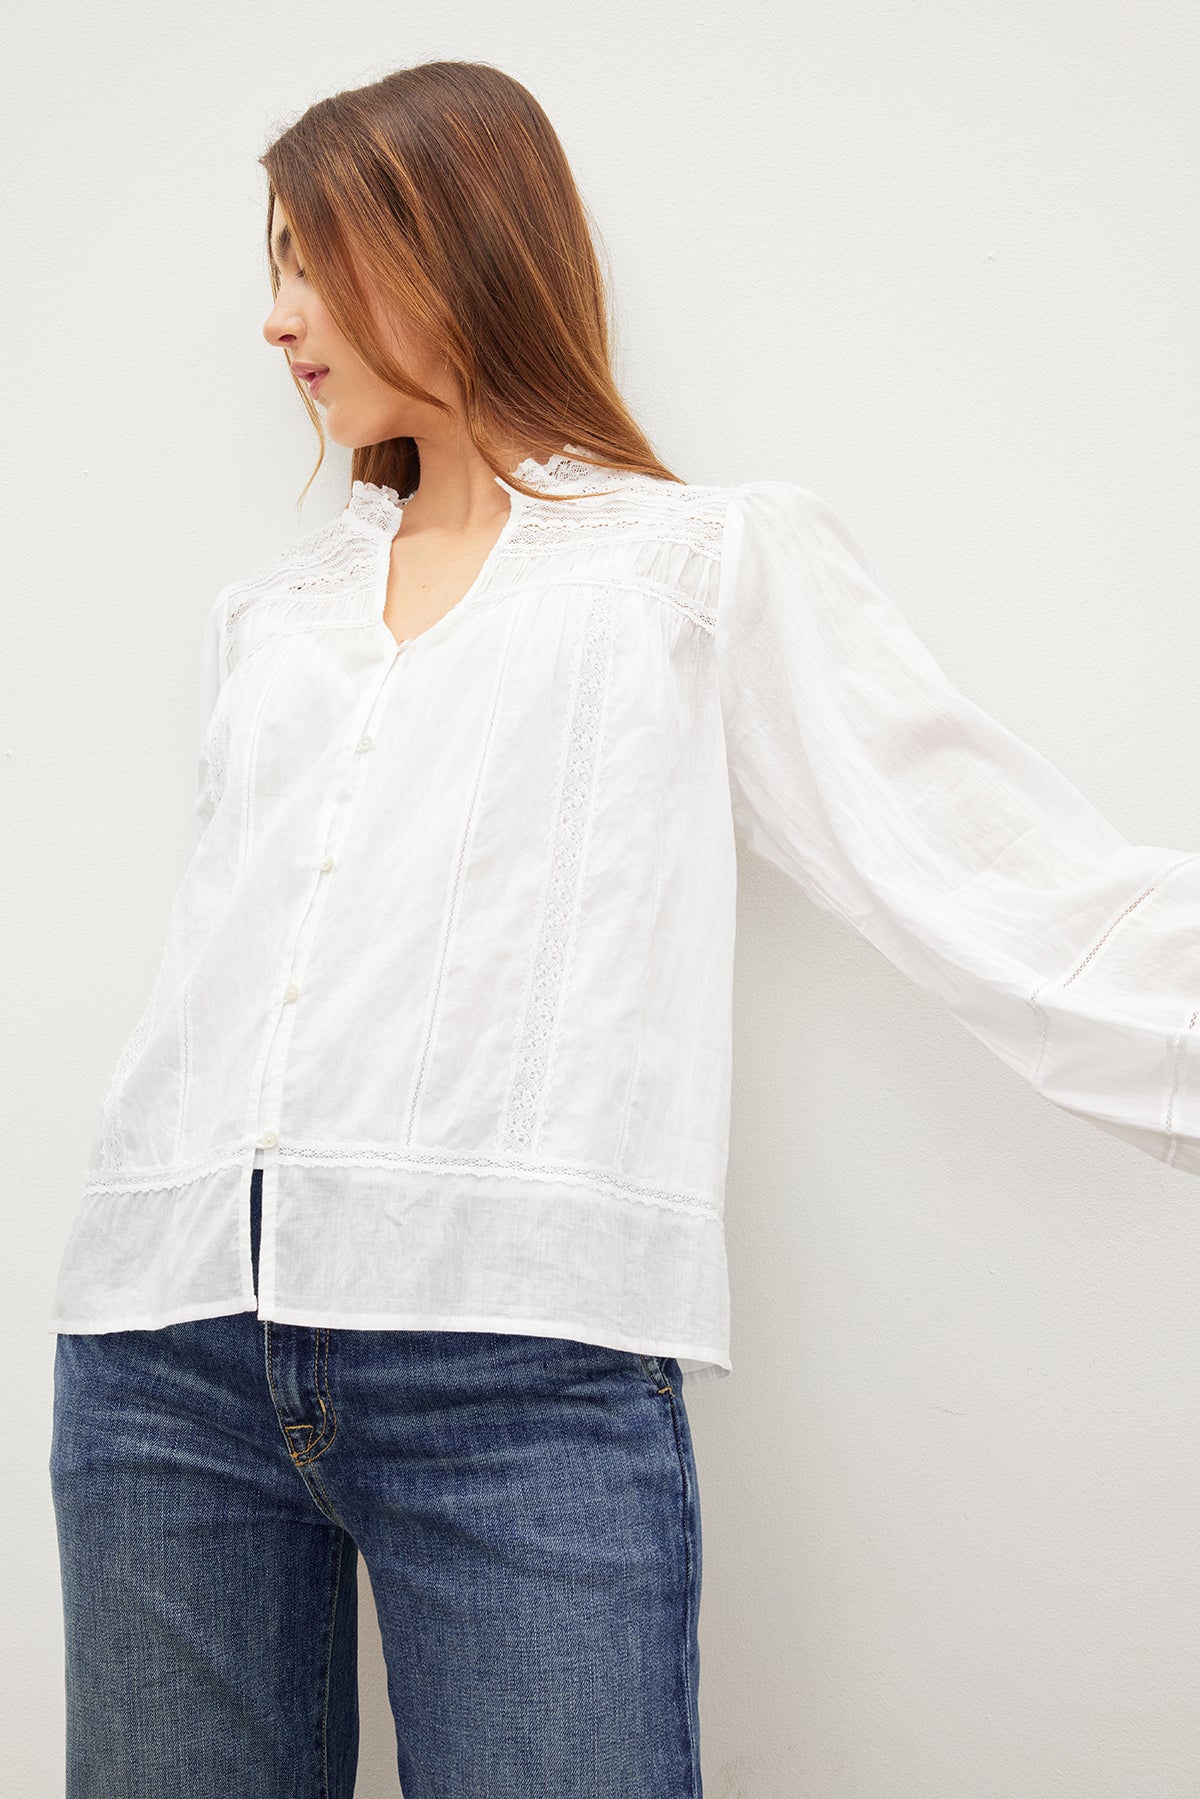 A woman in a LIAM COTTON LACE BUTTON FRONT TOP by Velvet by Graham & Spencer.-35982303723713